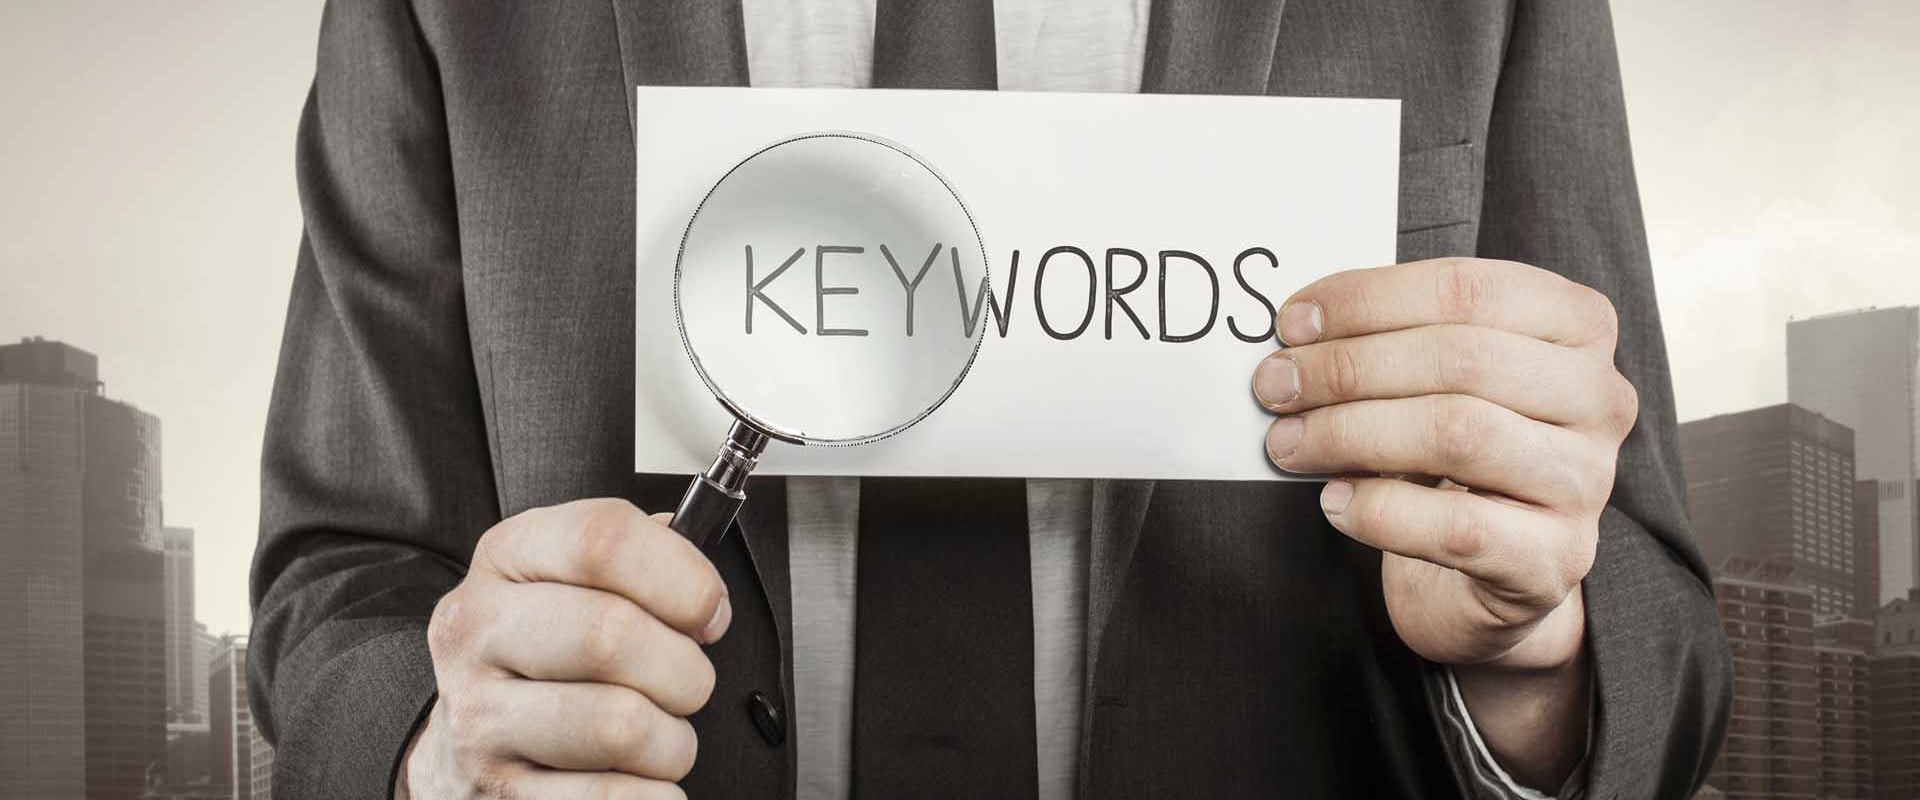 SEO Keyword Research for Gastonia Businesses